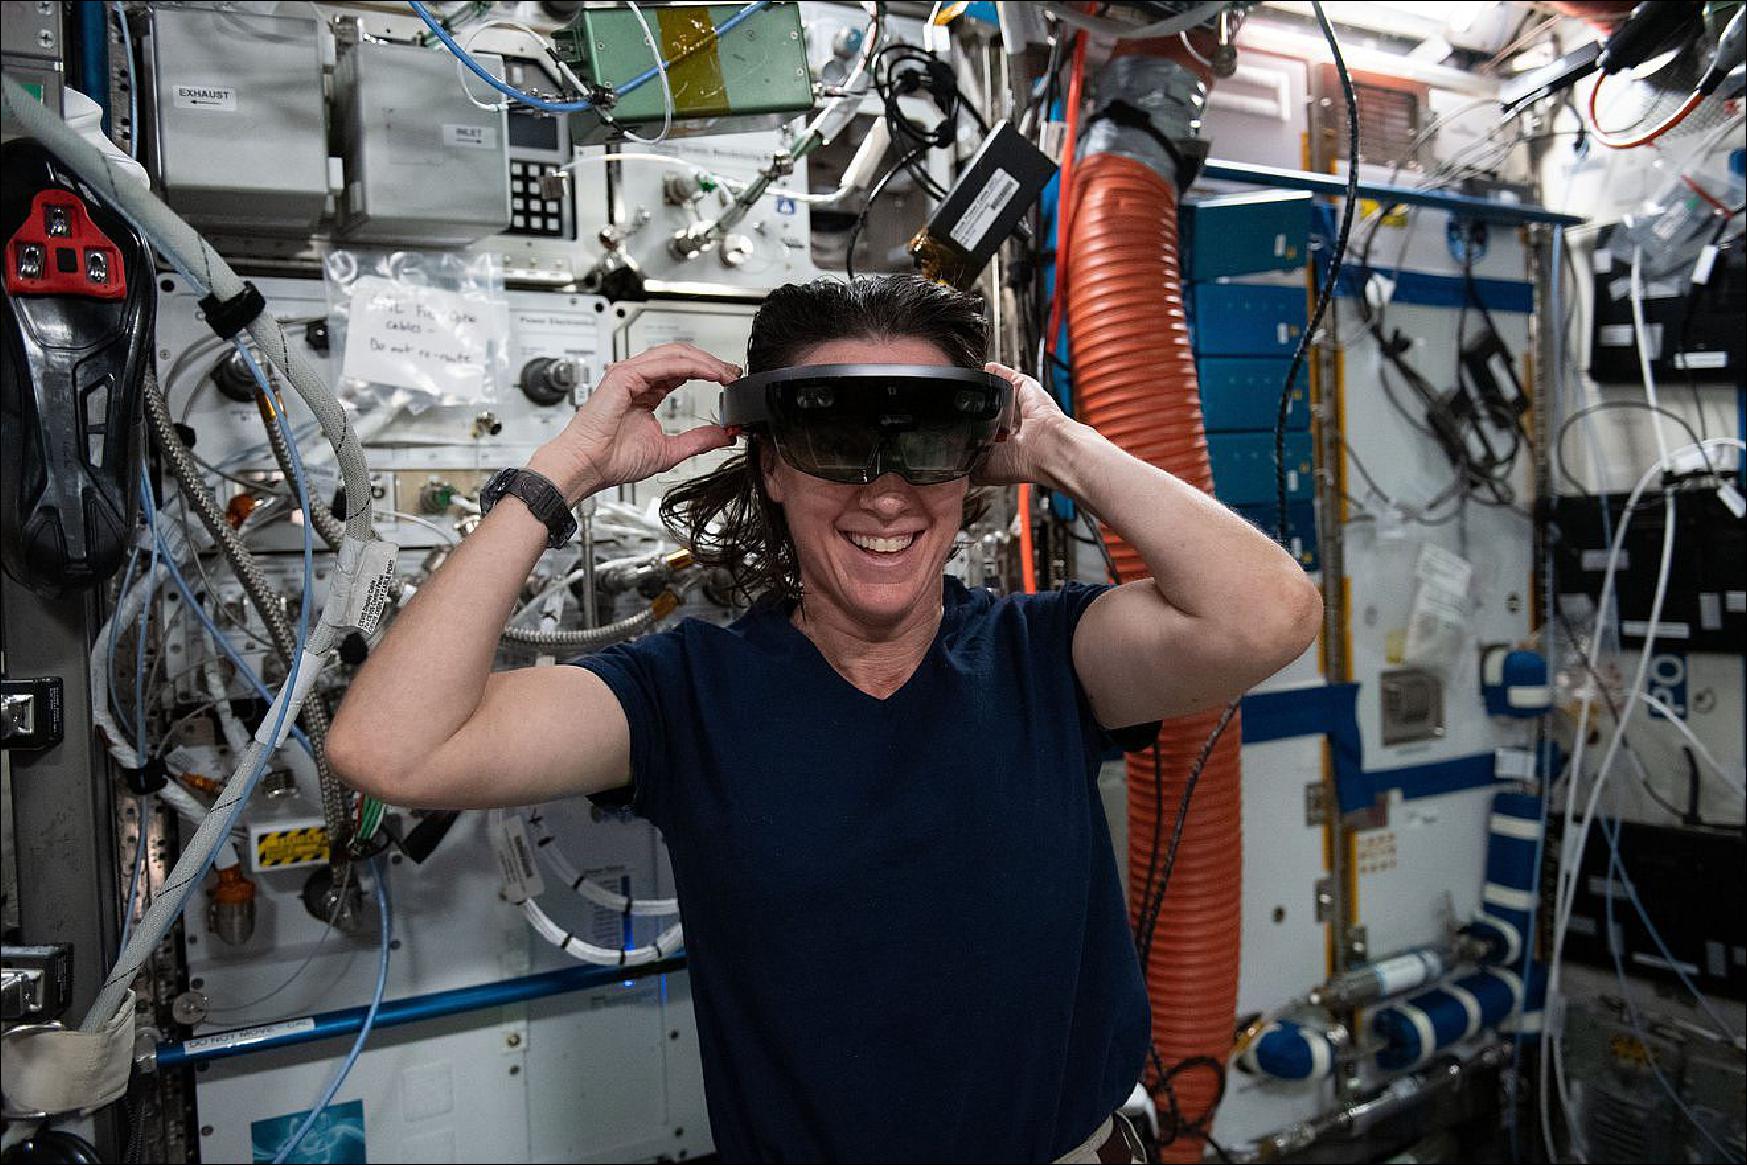 Figure 18: NASA Astronaut Megan McArthur dons a Microsoft HoloLens, a mixed reality (or augmented reality) headset, which allows her to see both the space around her as well as digital displays in her field of view (image credit: NASA)